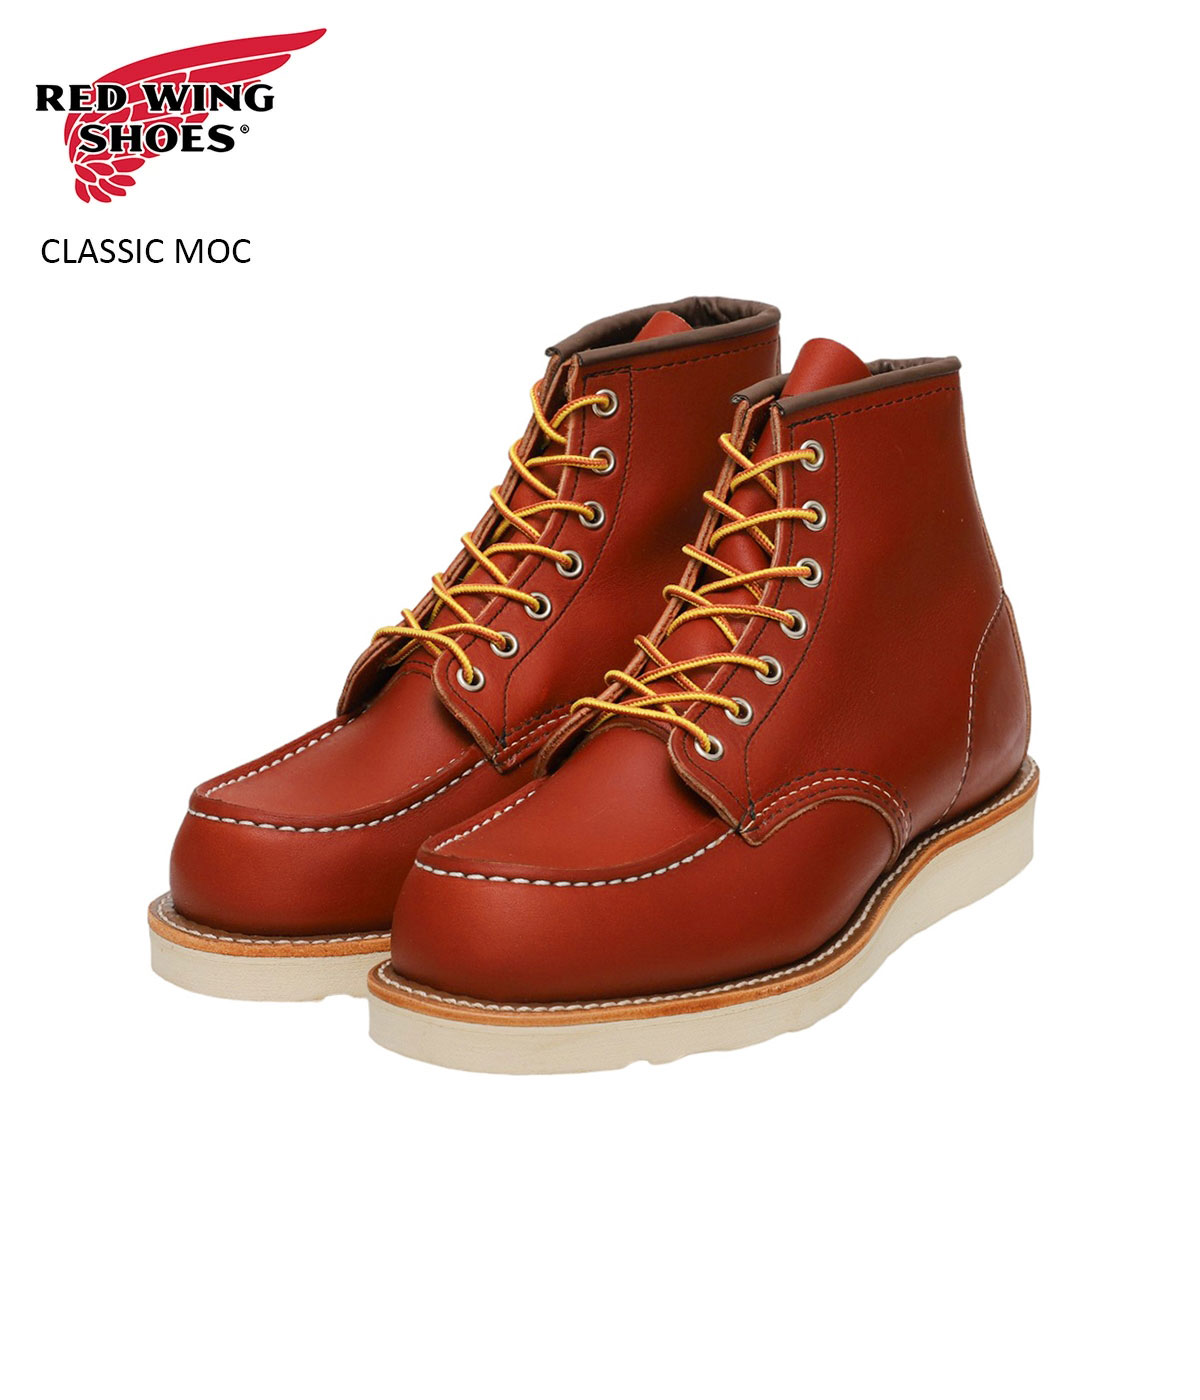 RED WING / レッドウィング ： CLASSIC MOC ： 8875 ARKnets - 通販 ...